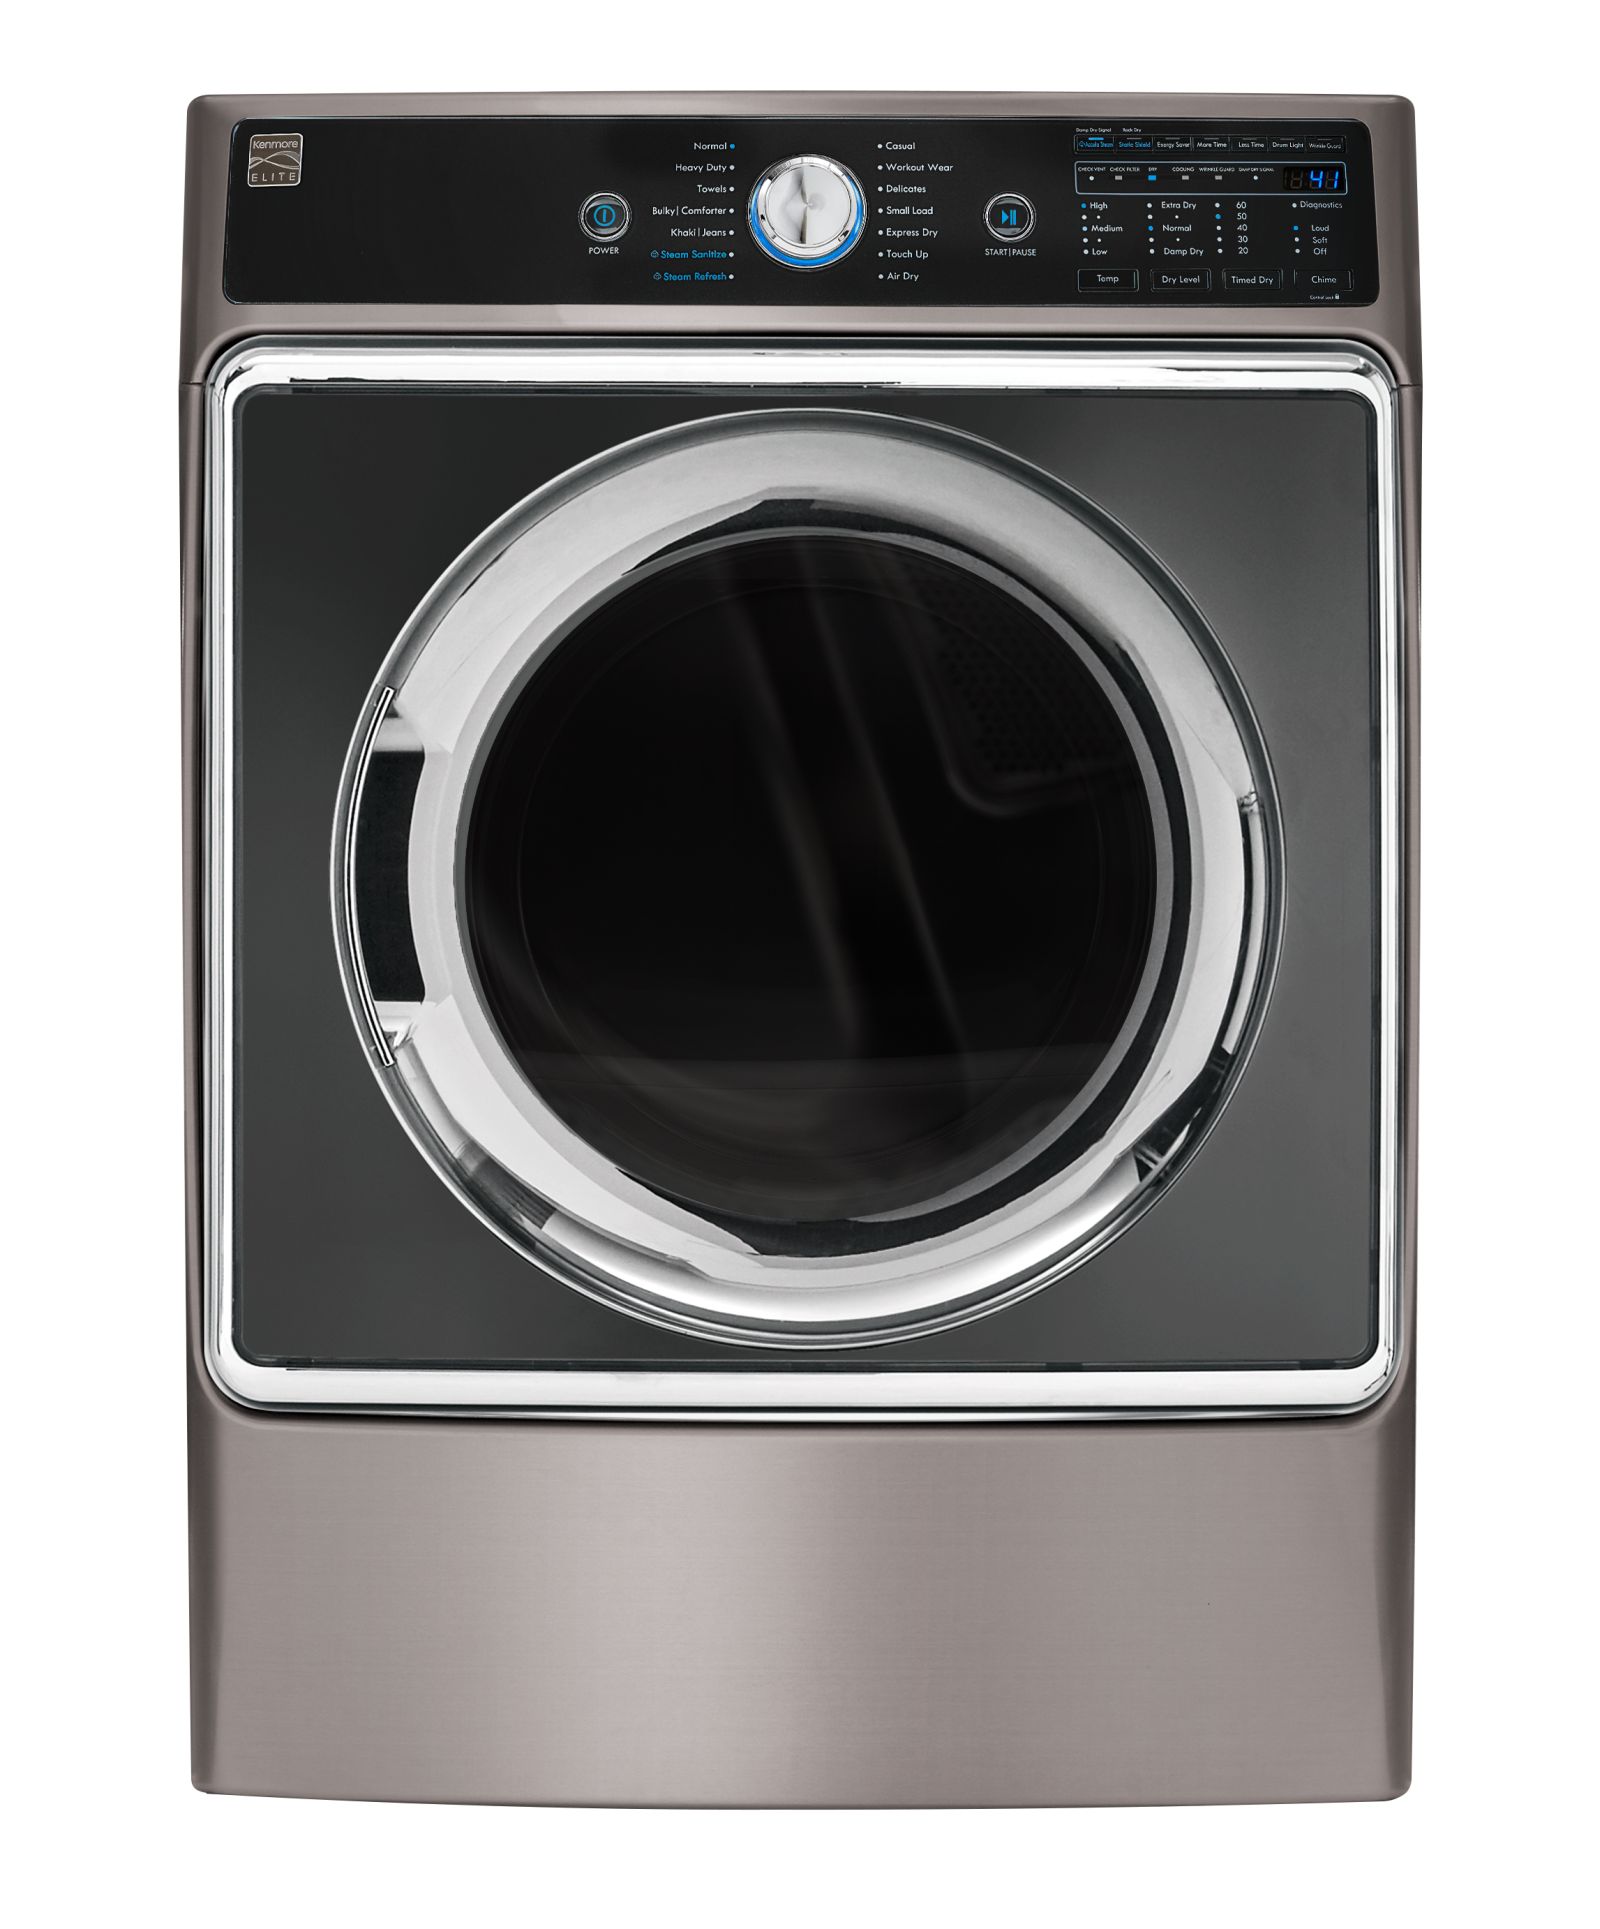 Kenmore Elite 81963 9.0 cu. ft. Electric Dryer with Accela Steam - Sears